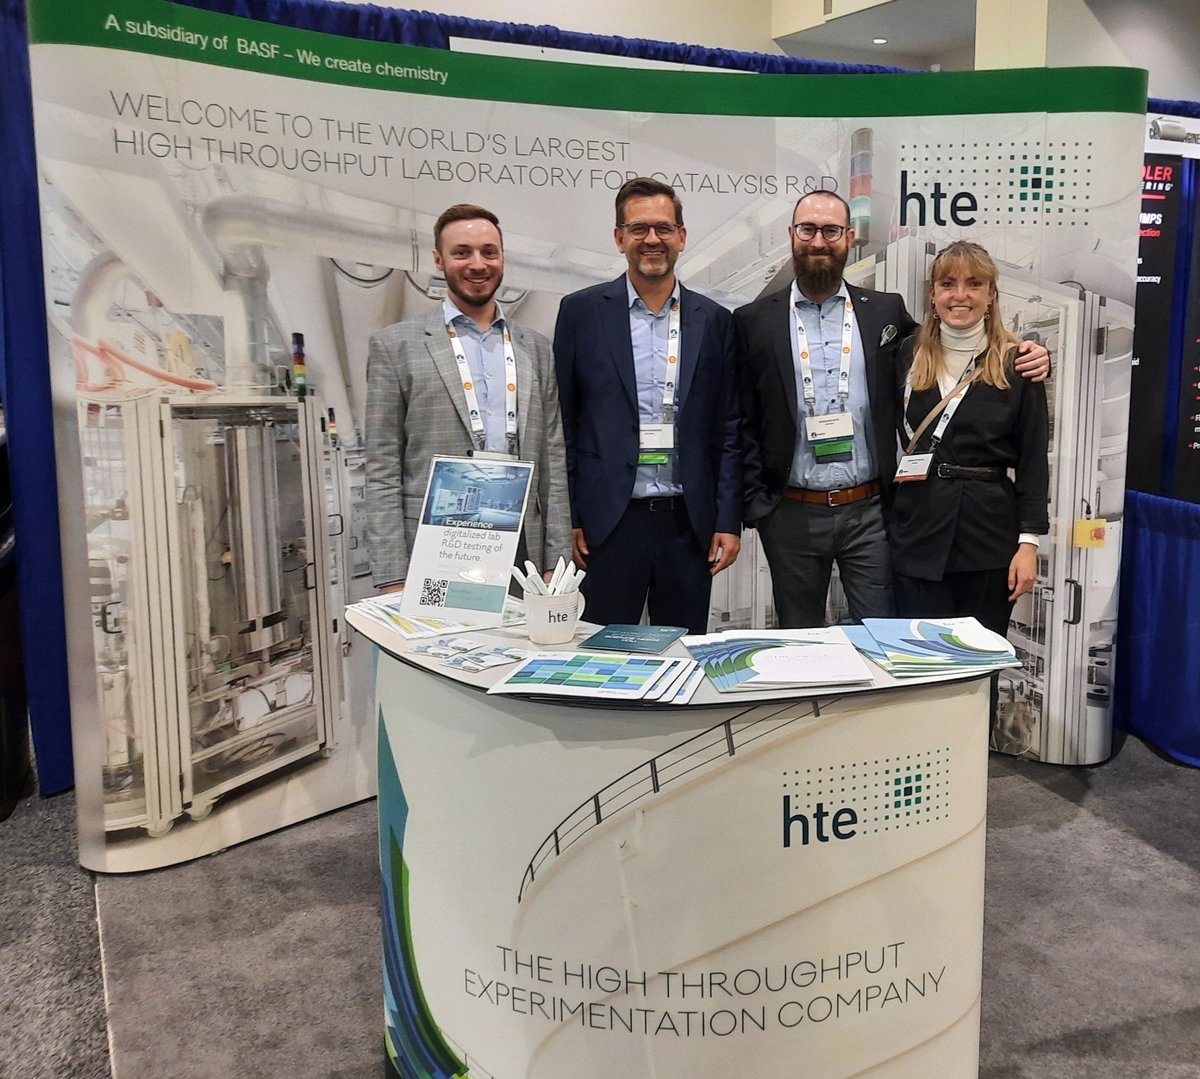 You still have the chance to meet us in Providence! If you are at #NAM28 stop by at our booth and talk to our experts Fabian, Benjamin, Xavier and Charlotte to learn more about our cutting-edge catalyst testing solutions.
#catalysis #highthroughput
More: hte-company.com/en/news-events…